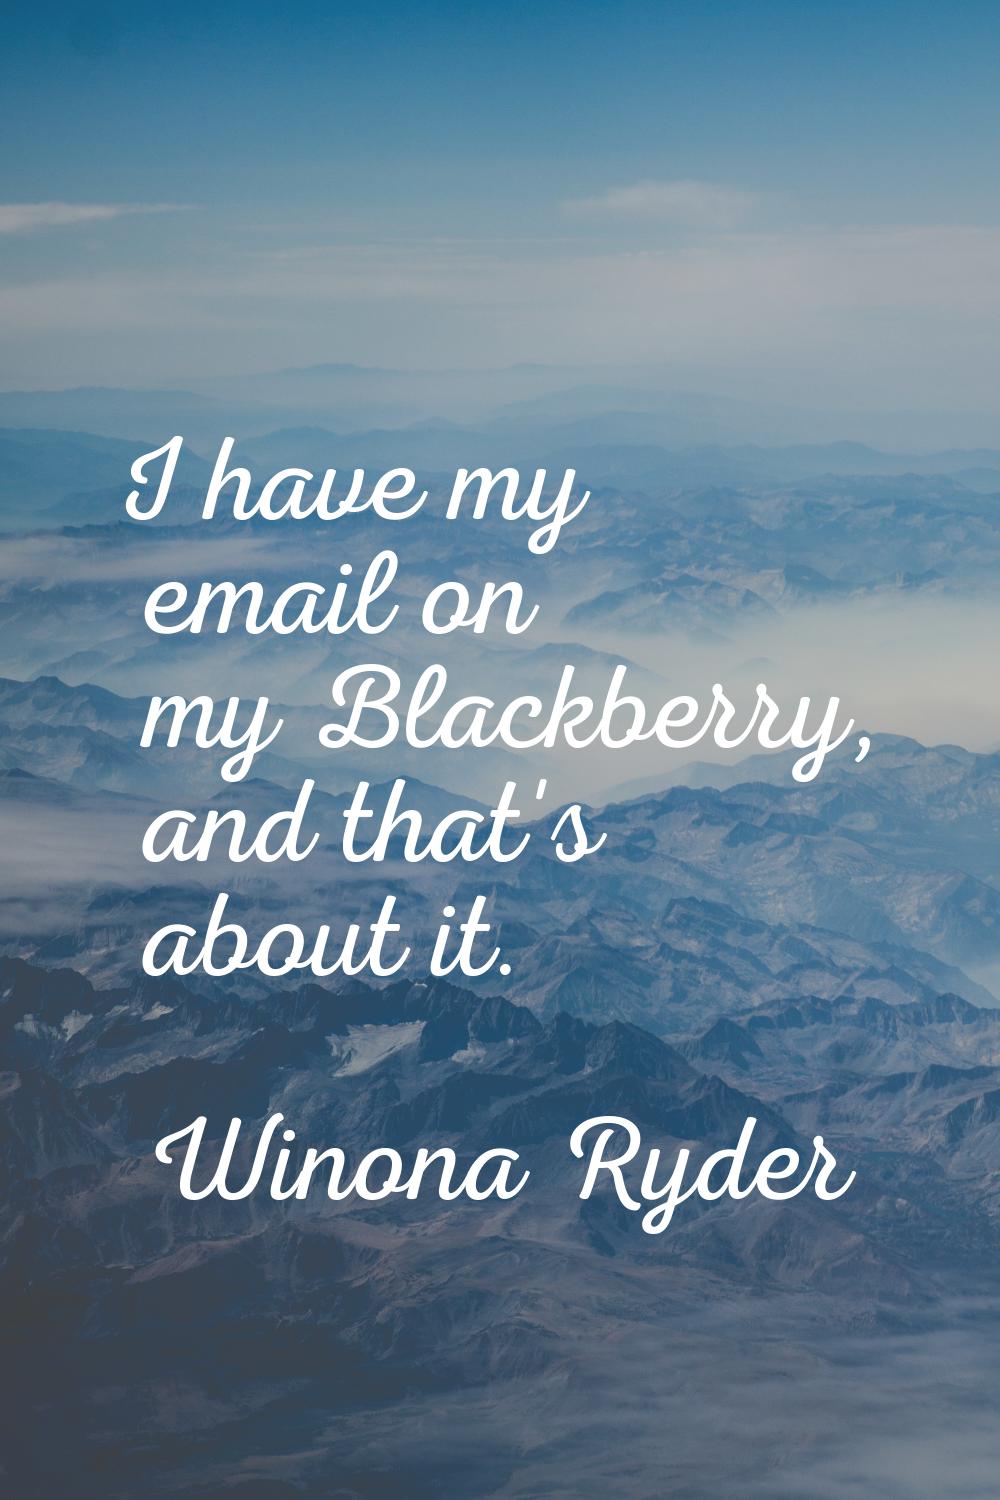 I have my email on my Blackberry, and that's about it.